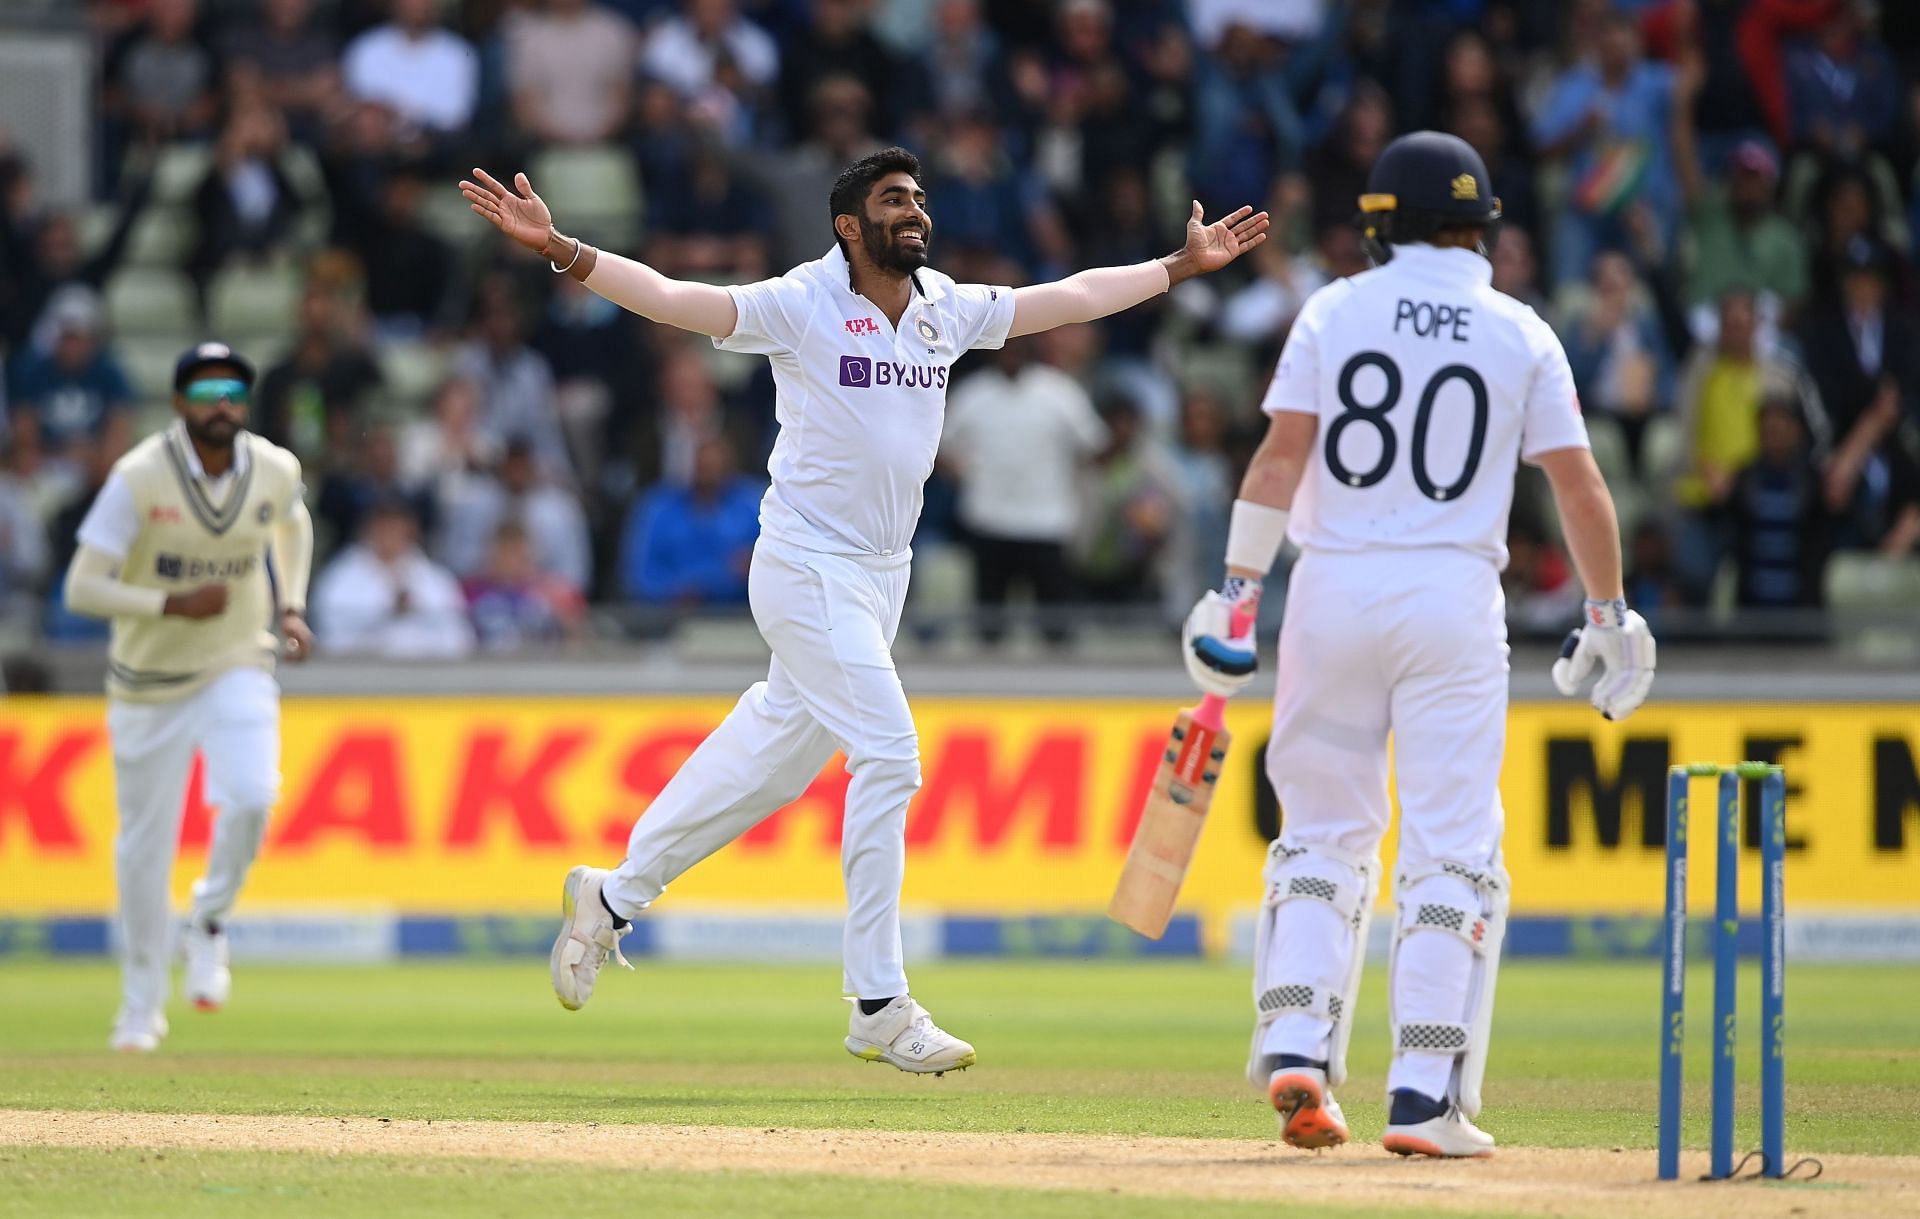 “Bumrah needs support from other bowlers” - Zaheer Khan on India’s plans for Day 5 in Birmingham